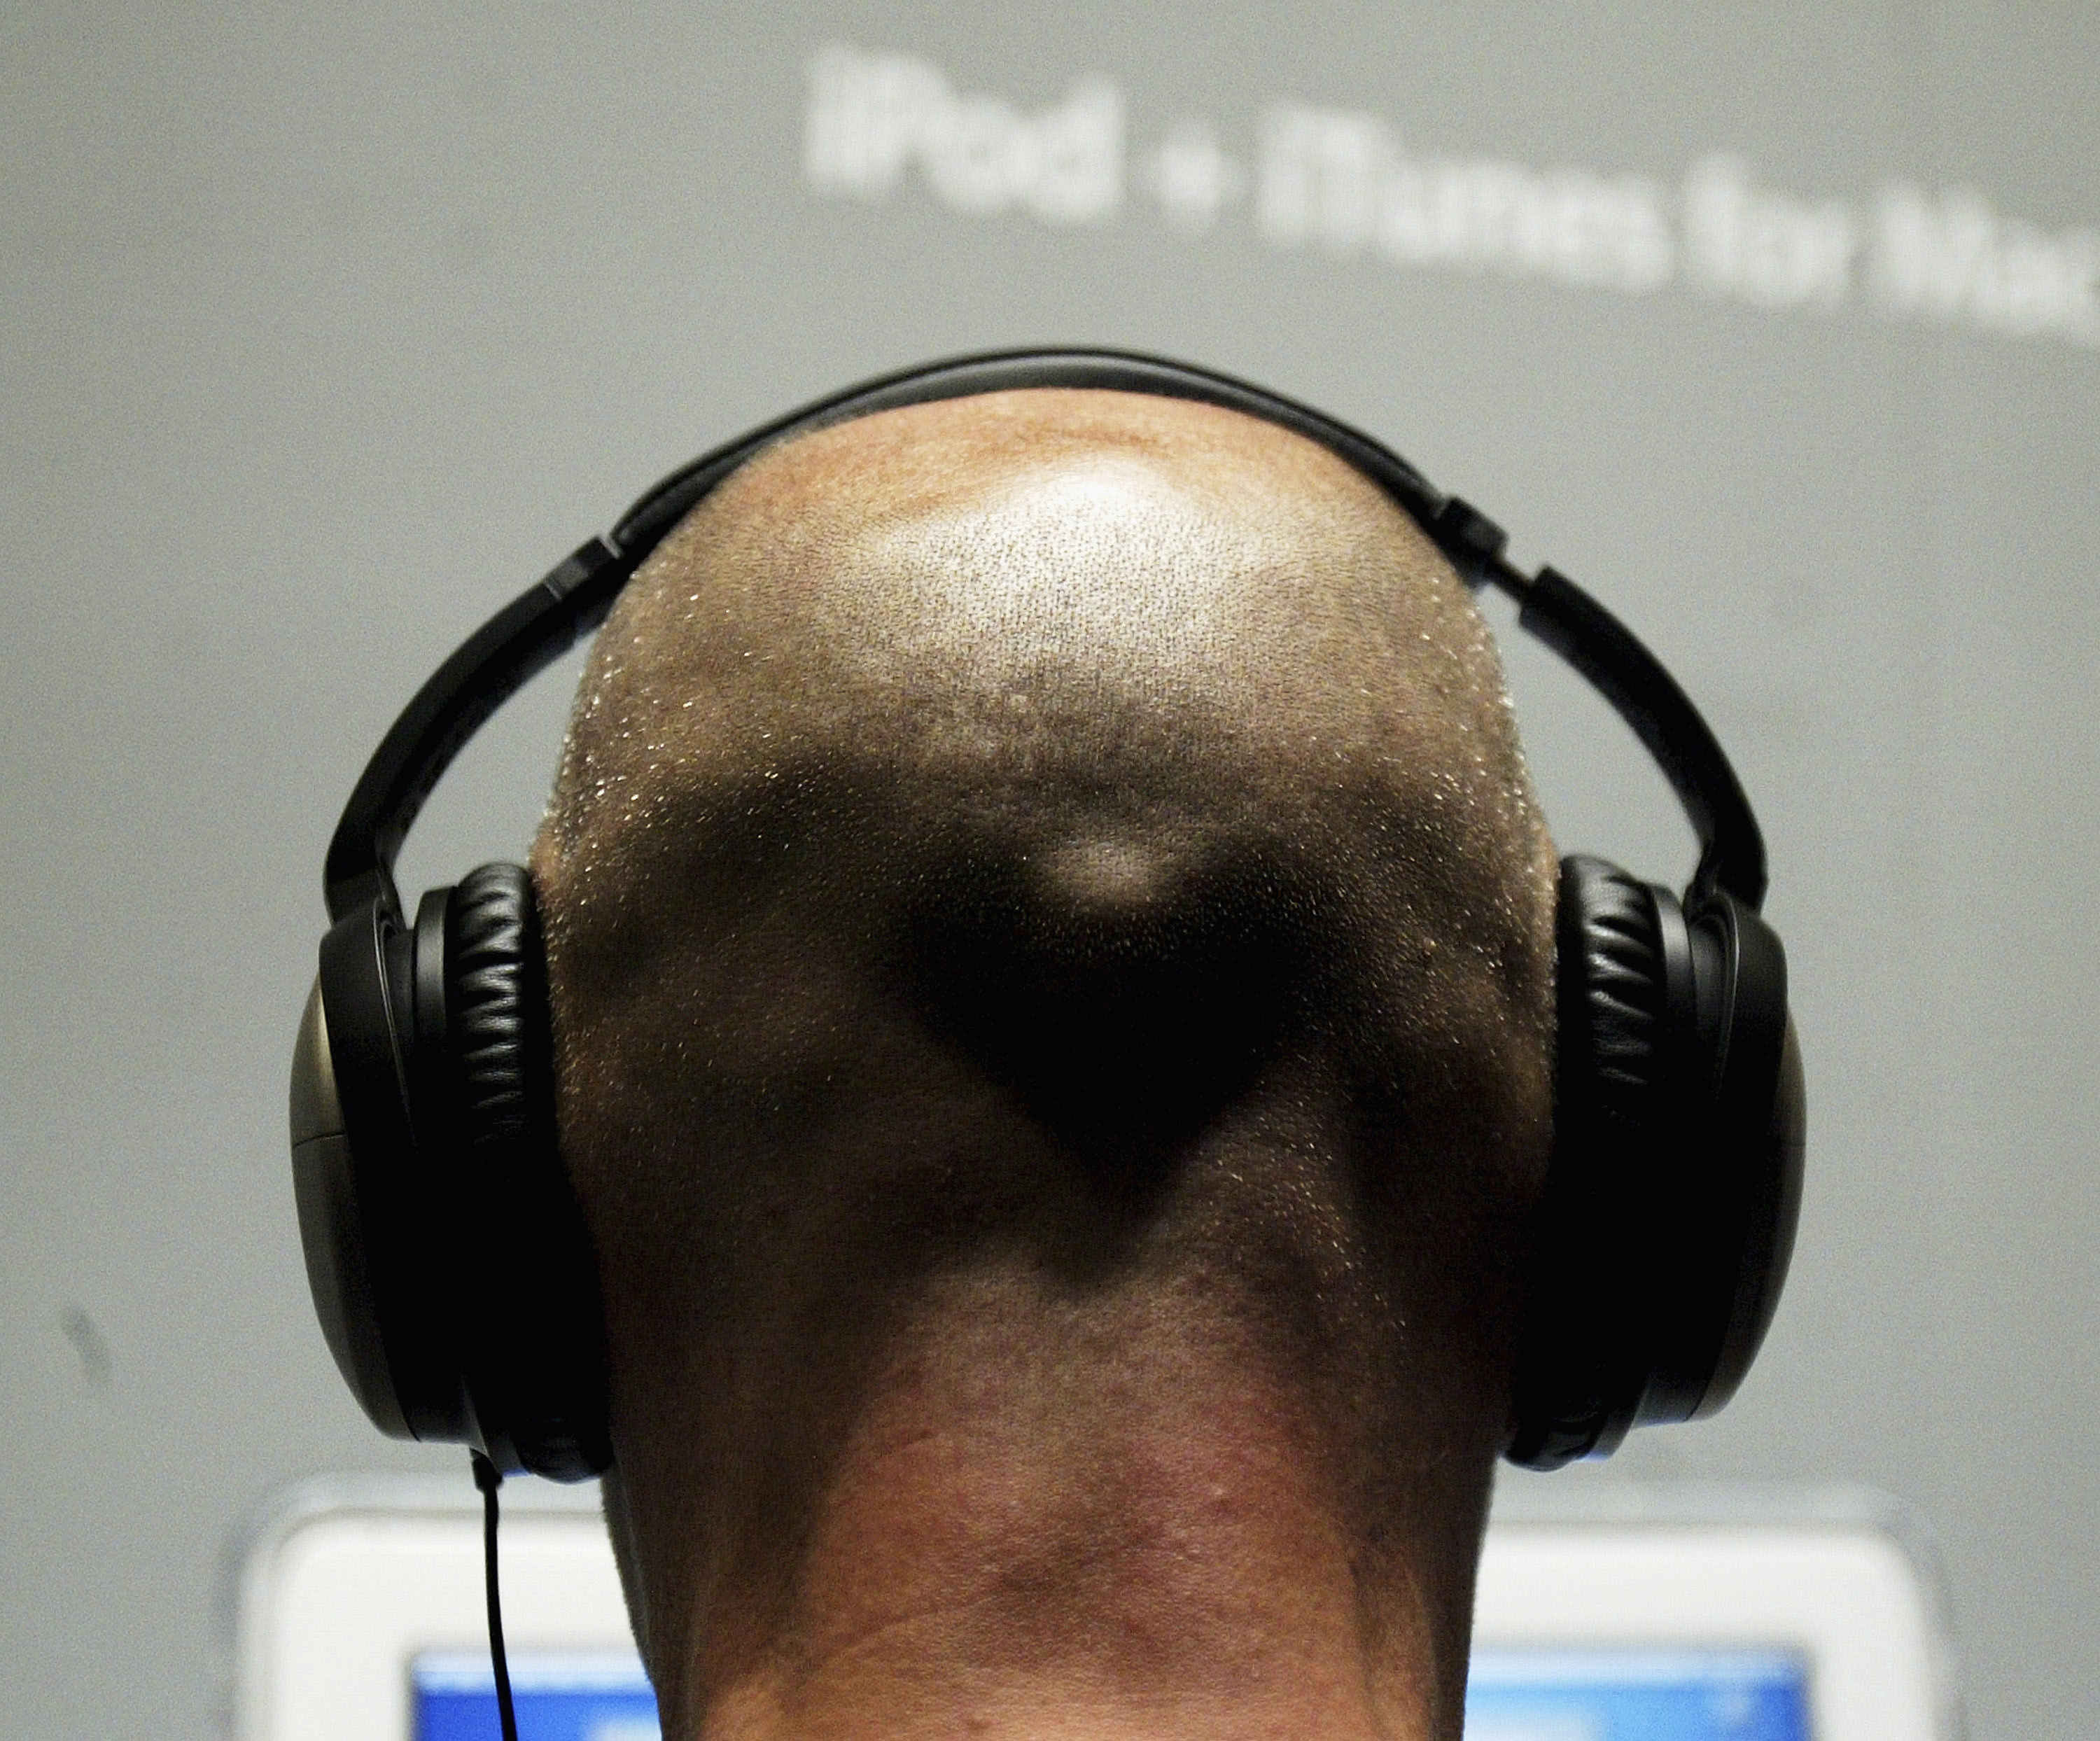 A person wearing headphones.